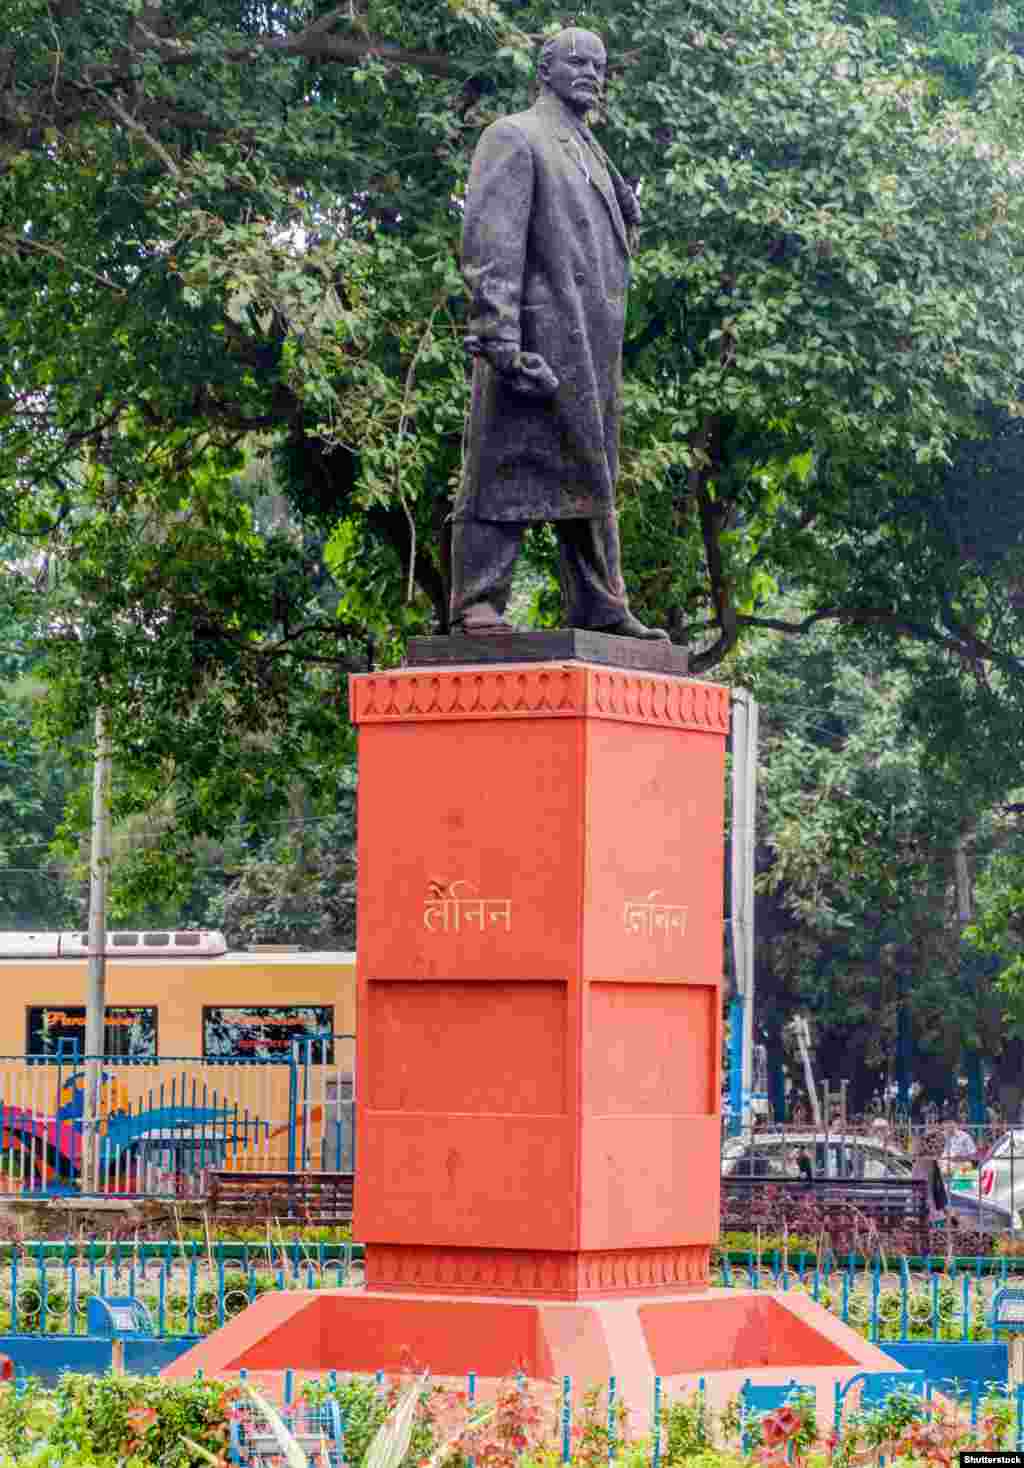 Kolkata, India: In 1969 this snugly dressed Lenin statue was erected in the midst of a sizzling-hot dry season. Kolkata has long been a stronghold of the hard left, as evidenced by the numerous hammer-and-sickle emblems painted throughout the city.